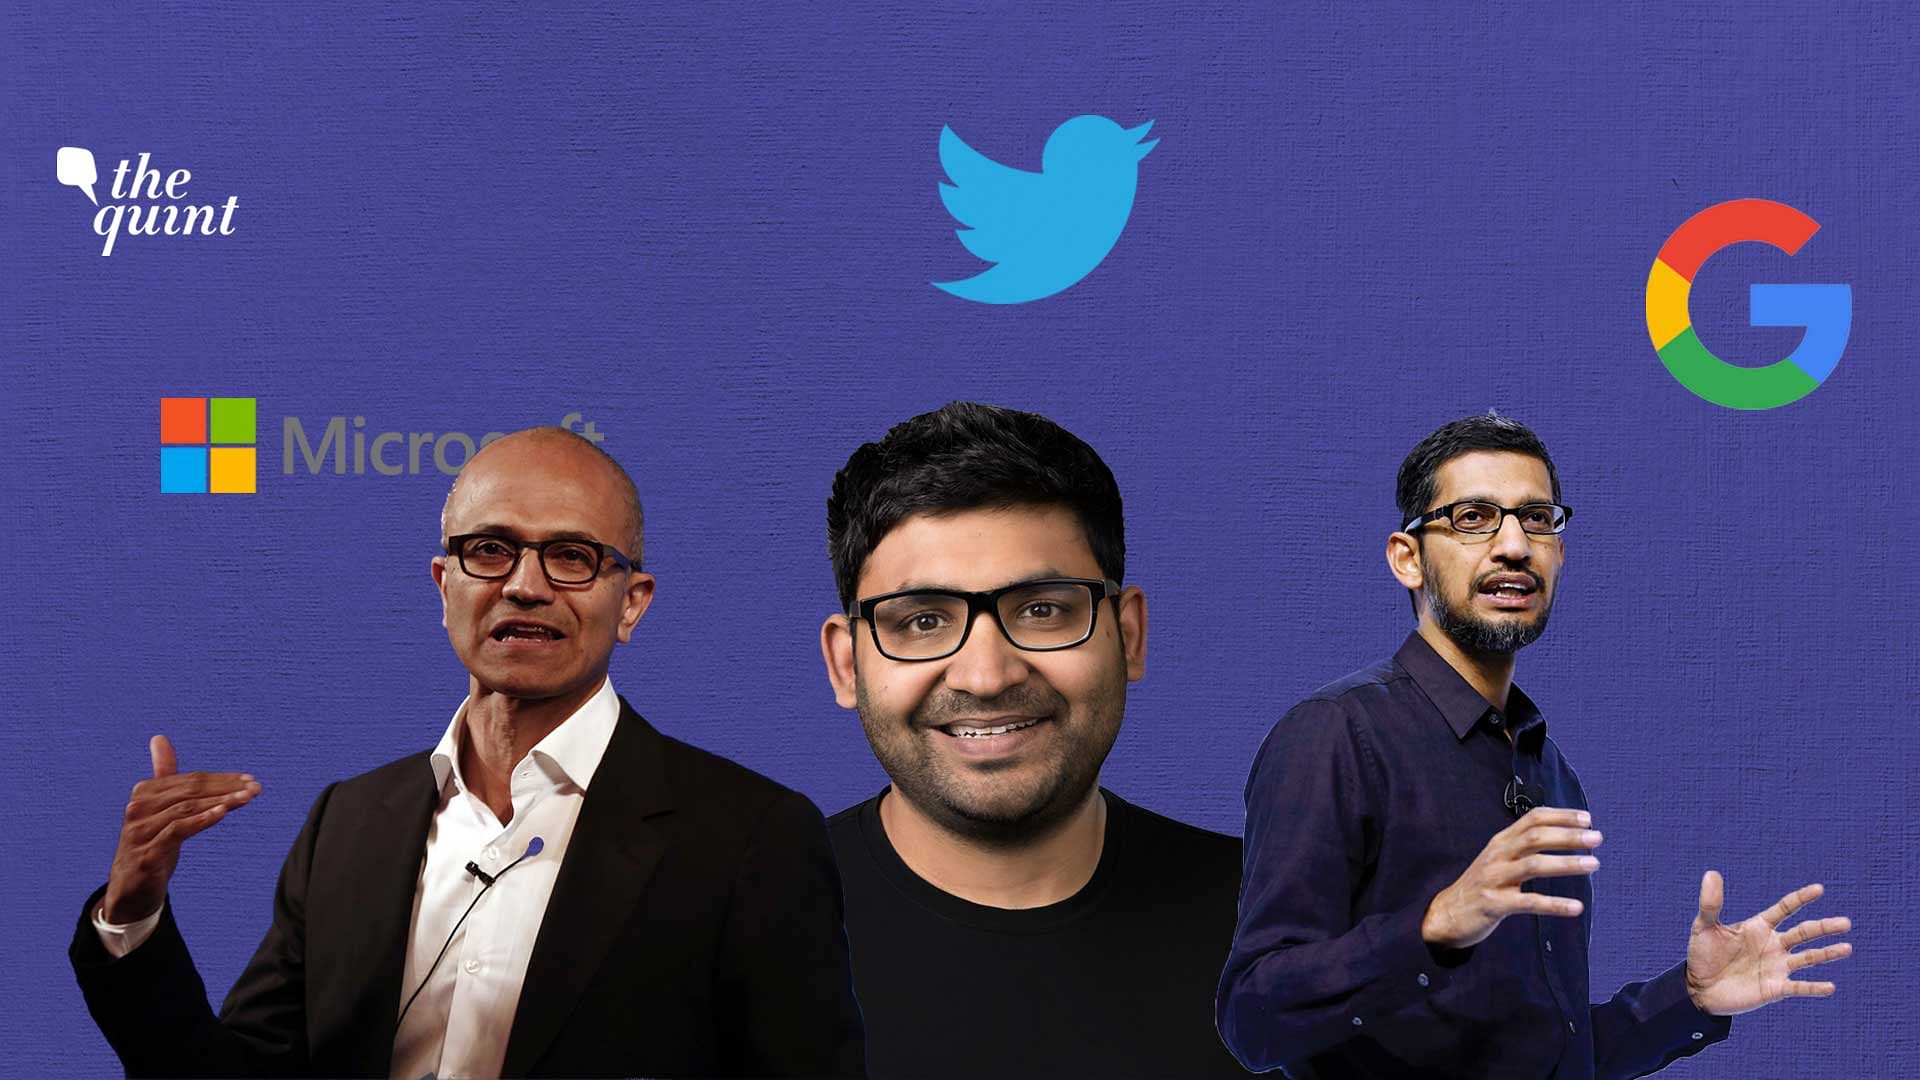 <div class="paragraphs"><p>Last month as <a href="https://www.thequint.com/tech-and-auto/indian-origin-parag-agrawal-to-take-over-as-new-twitter-ceo-who-is-he">Parag Agrawal</a> joined the ranks of eleven other India-born CEOs heading global technological giants, the social media went abuzz with congratulatory messages praising Indian grit and talent. Image used for representative purposes.&nbsp;</p></div>